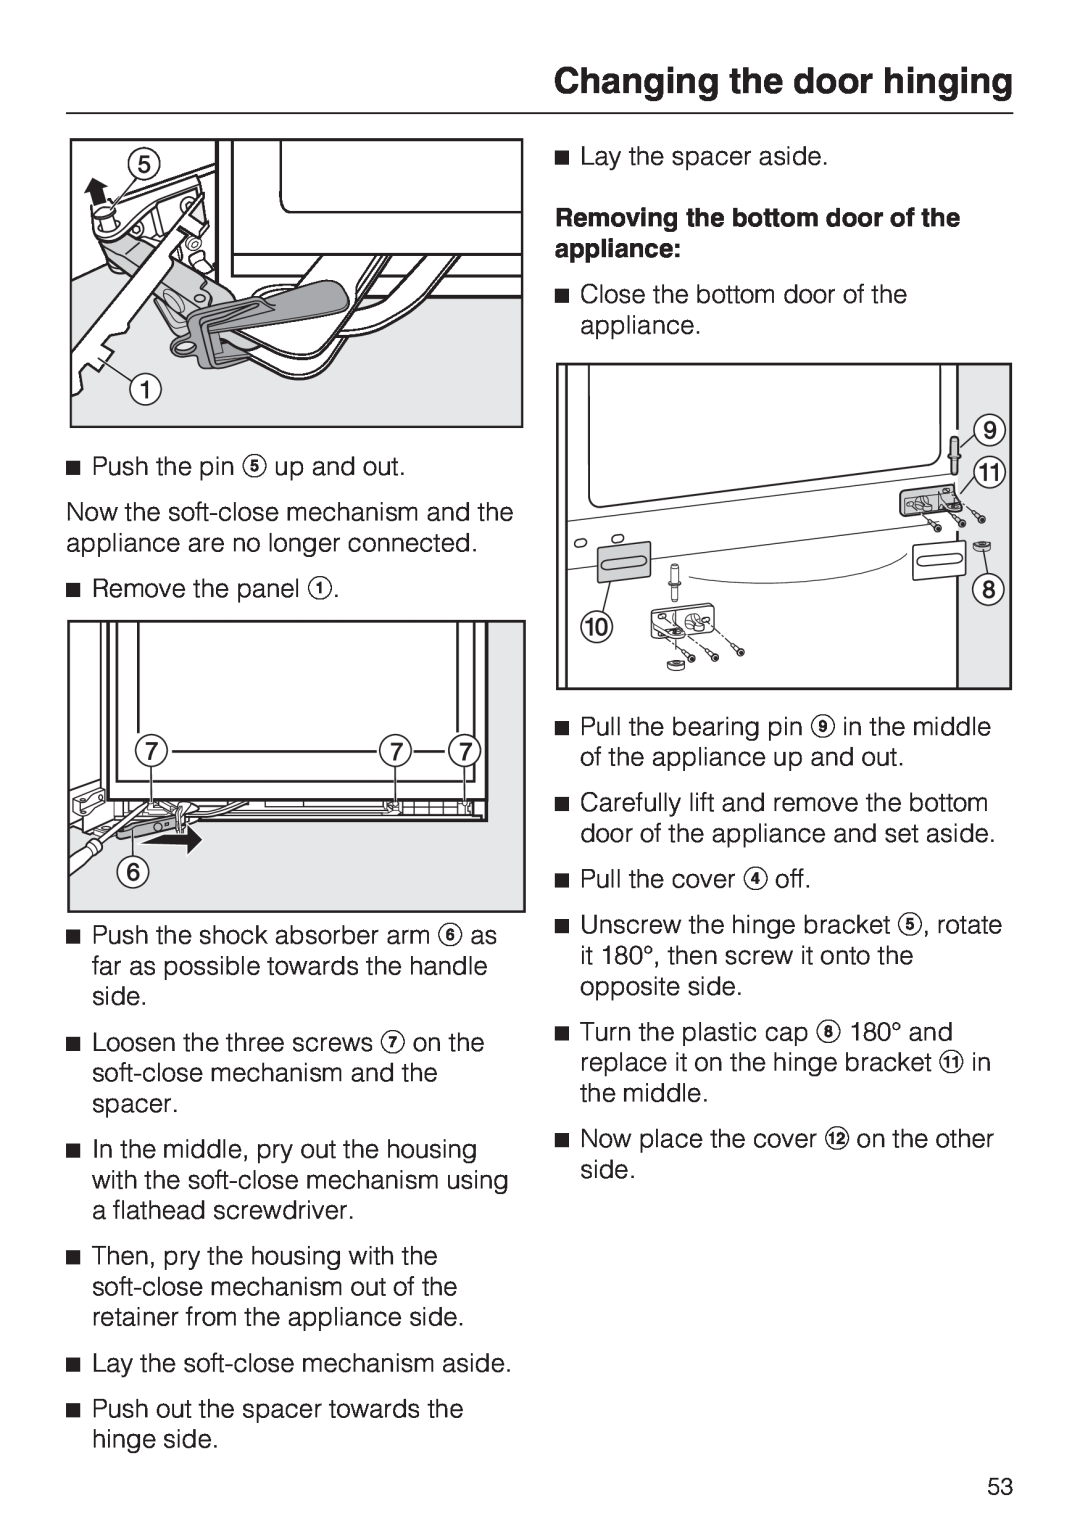 Miele KFN 14943 SD ED installation instructions Removing the bottom door of the appliance, Changing the door hinging 